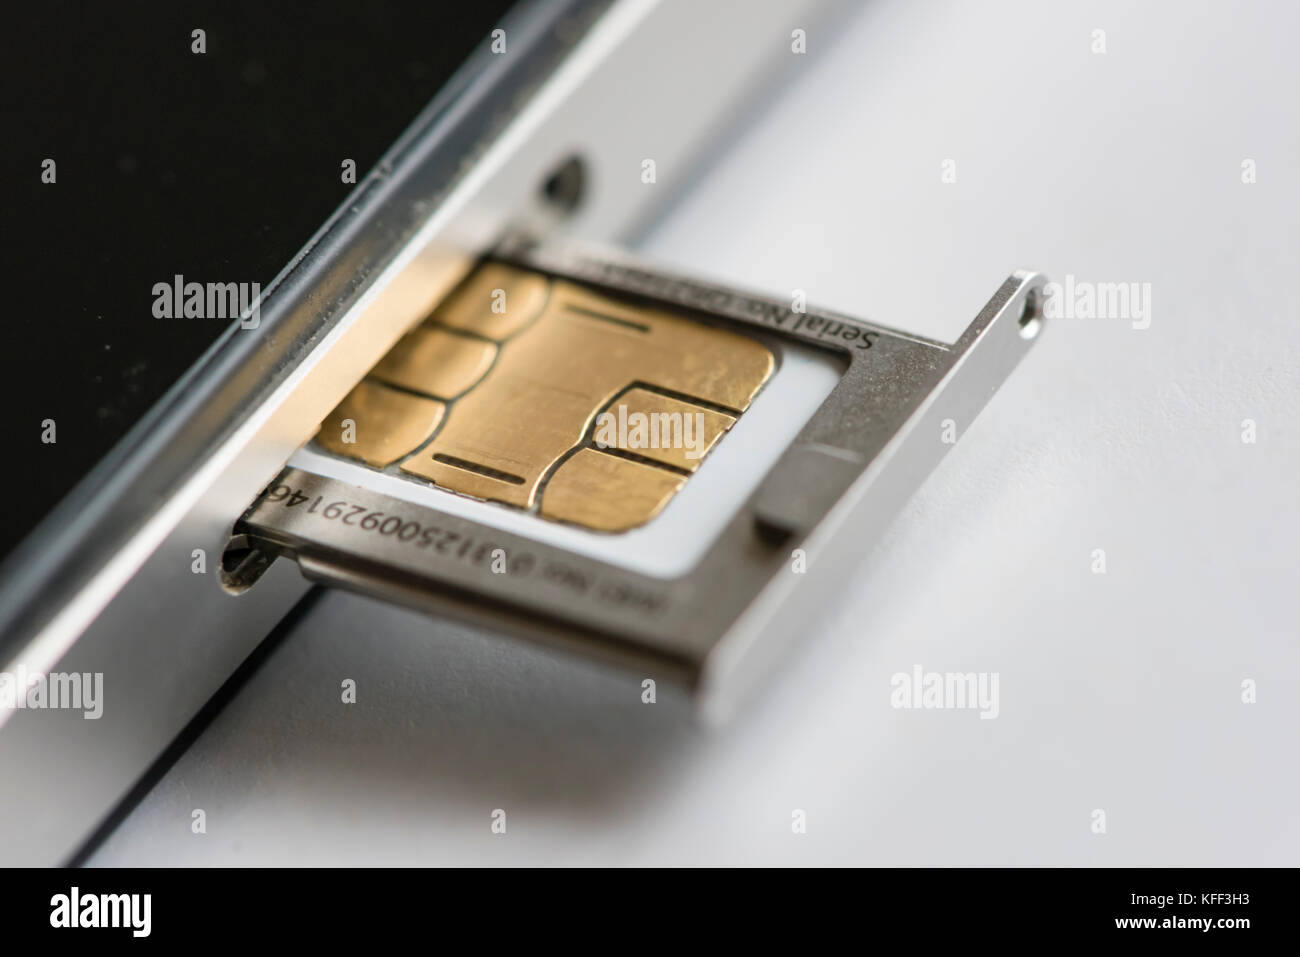 A Micro Sim Card Is Inserted Into An Apple Iphone 4 Smartphone